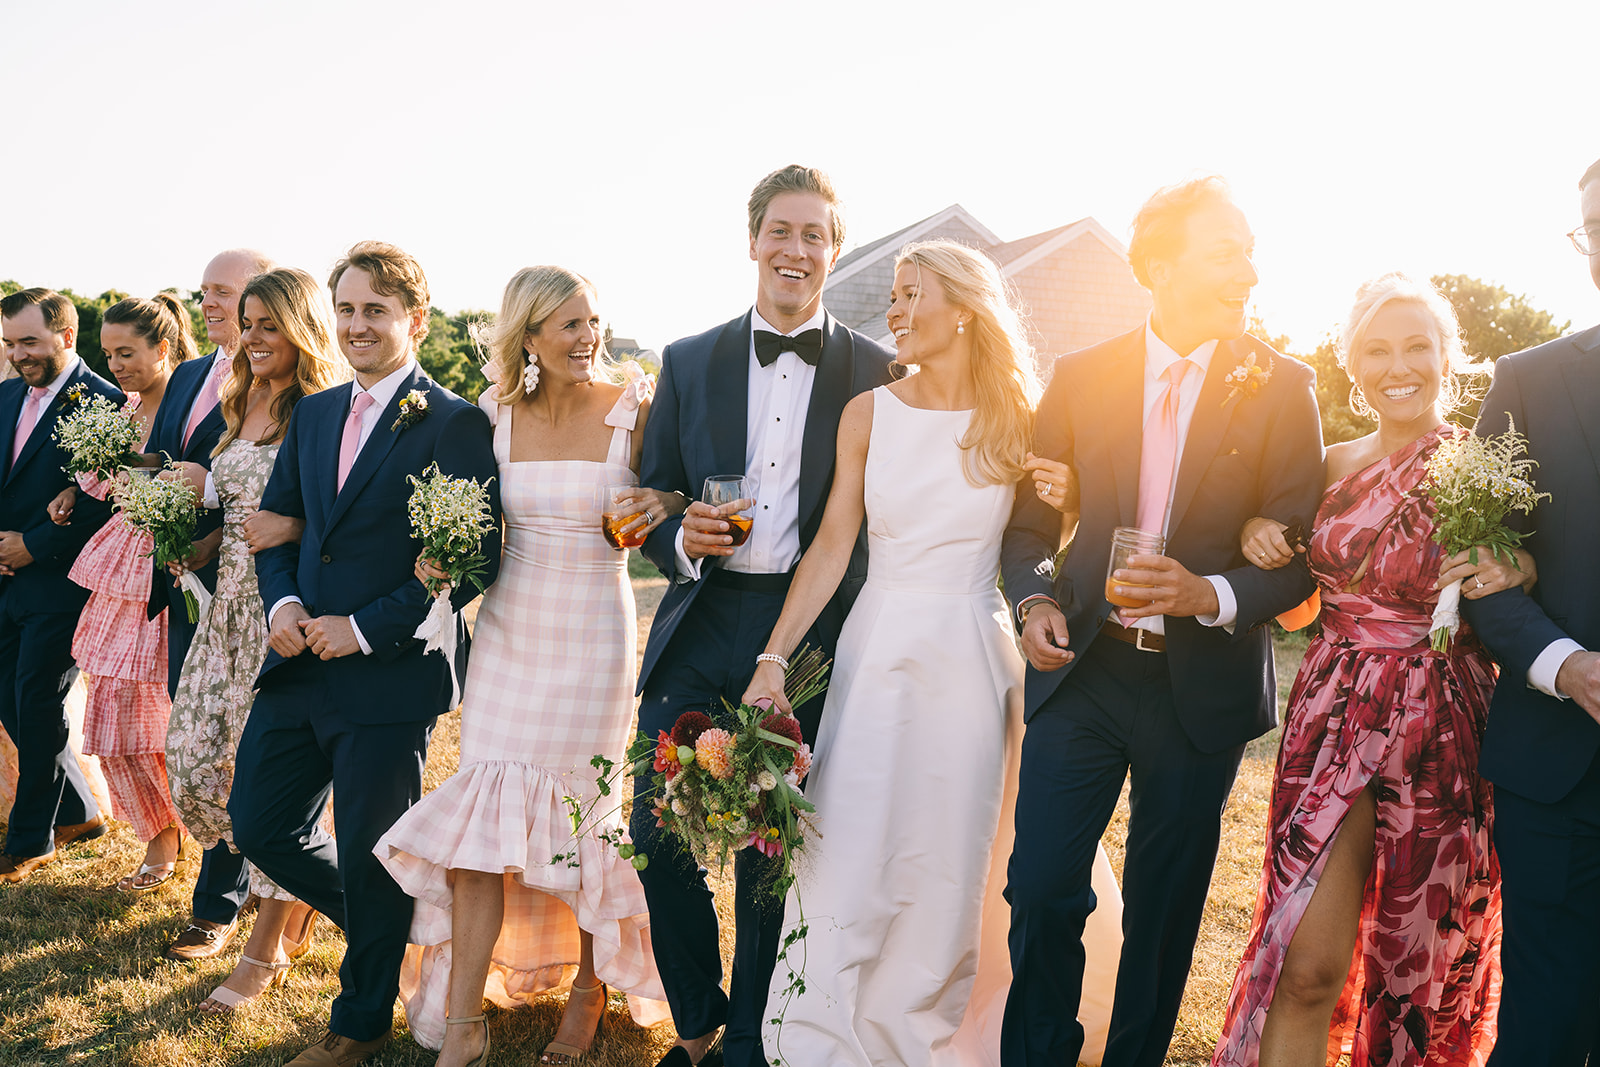 Wedding party in colorful clothing at Nantucket wedding